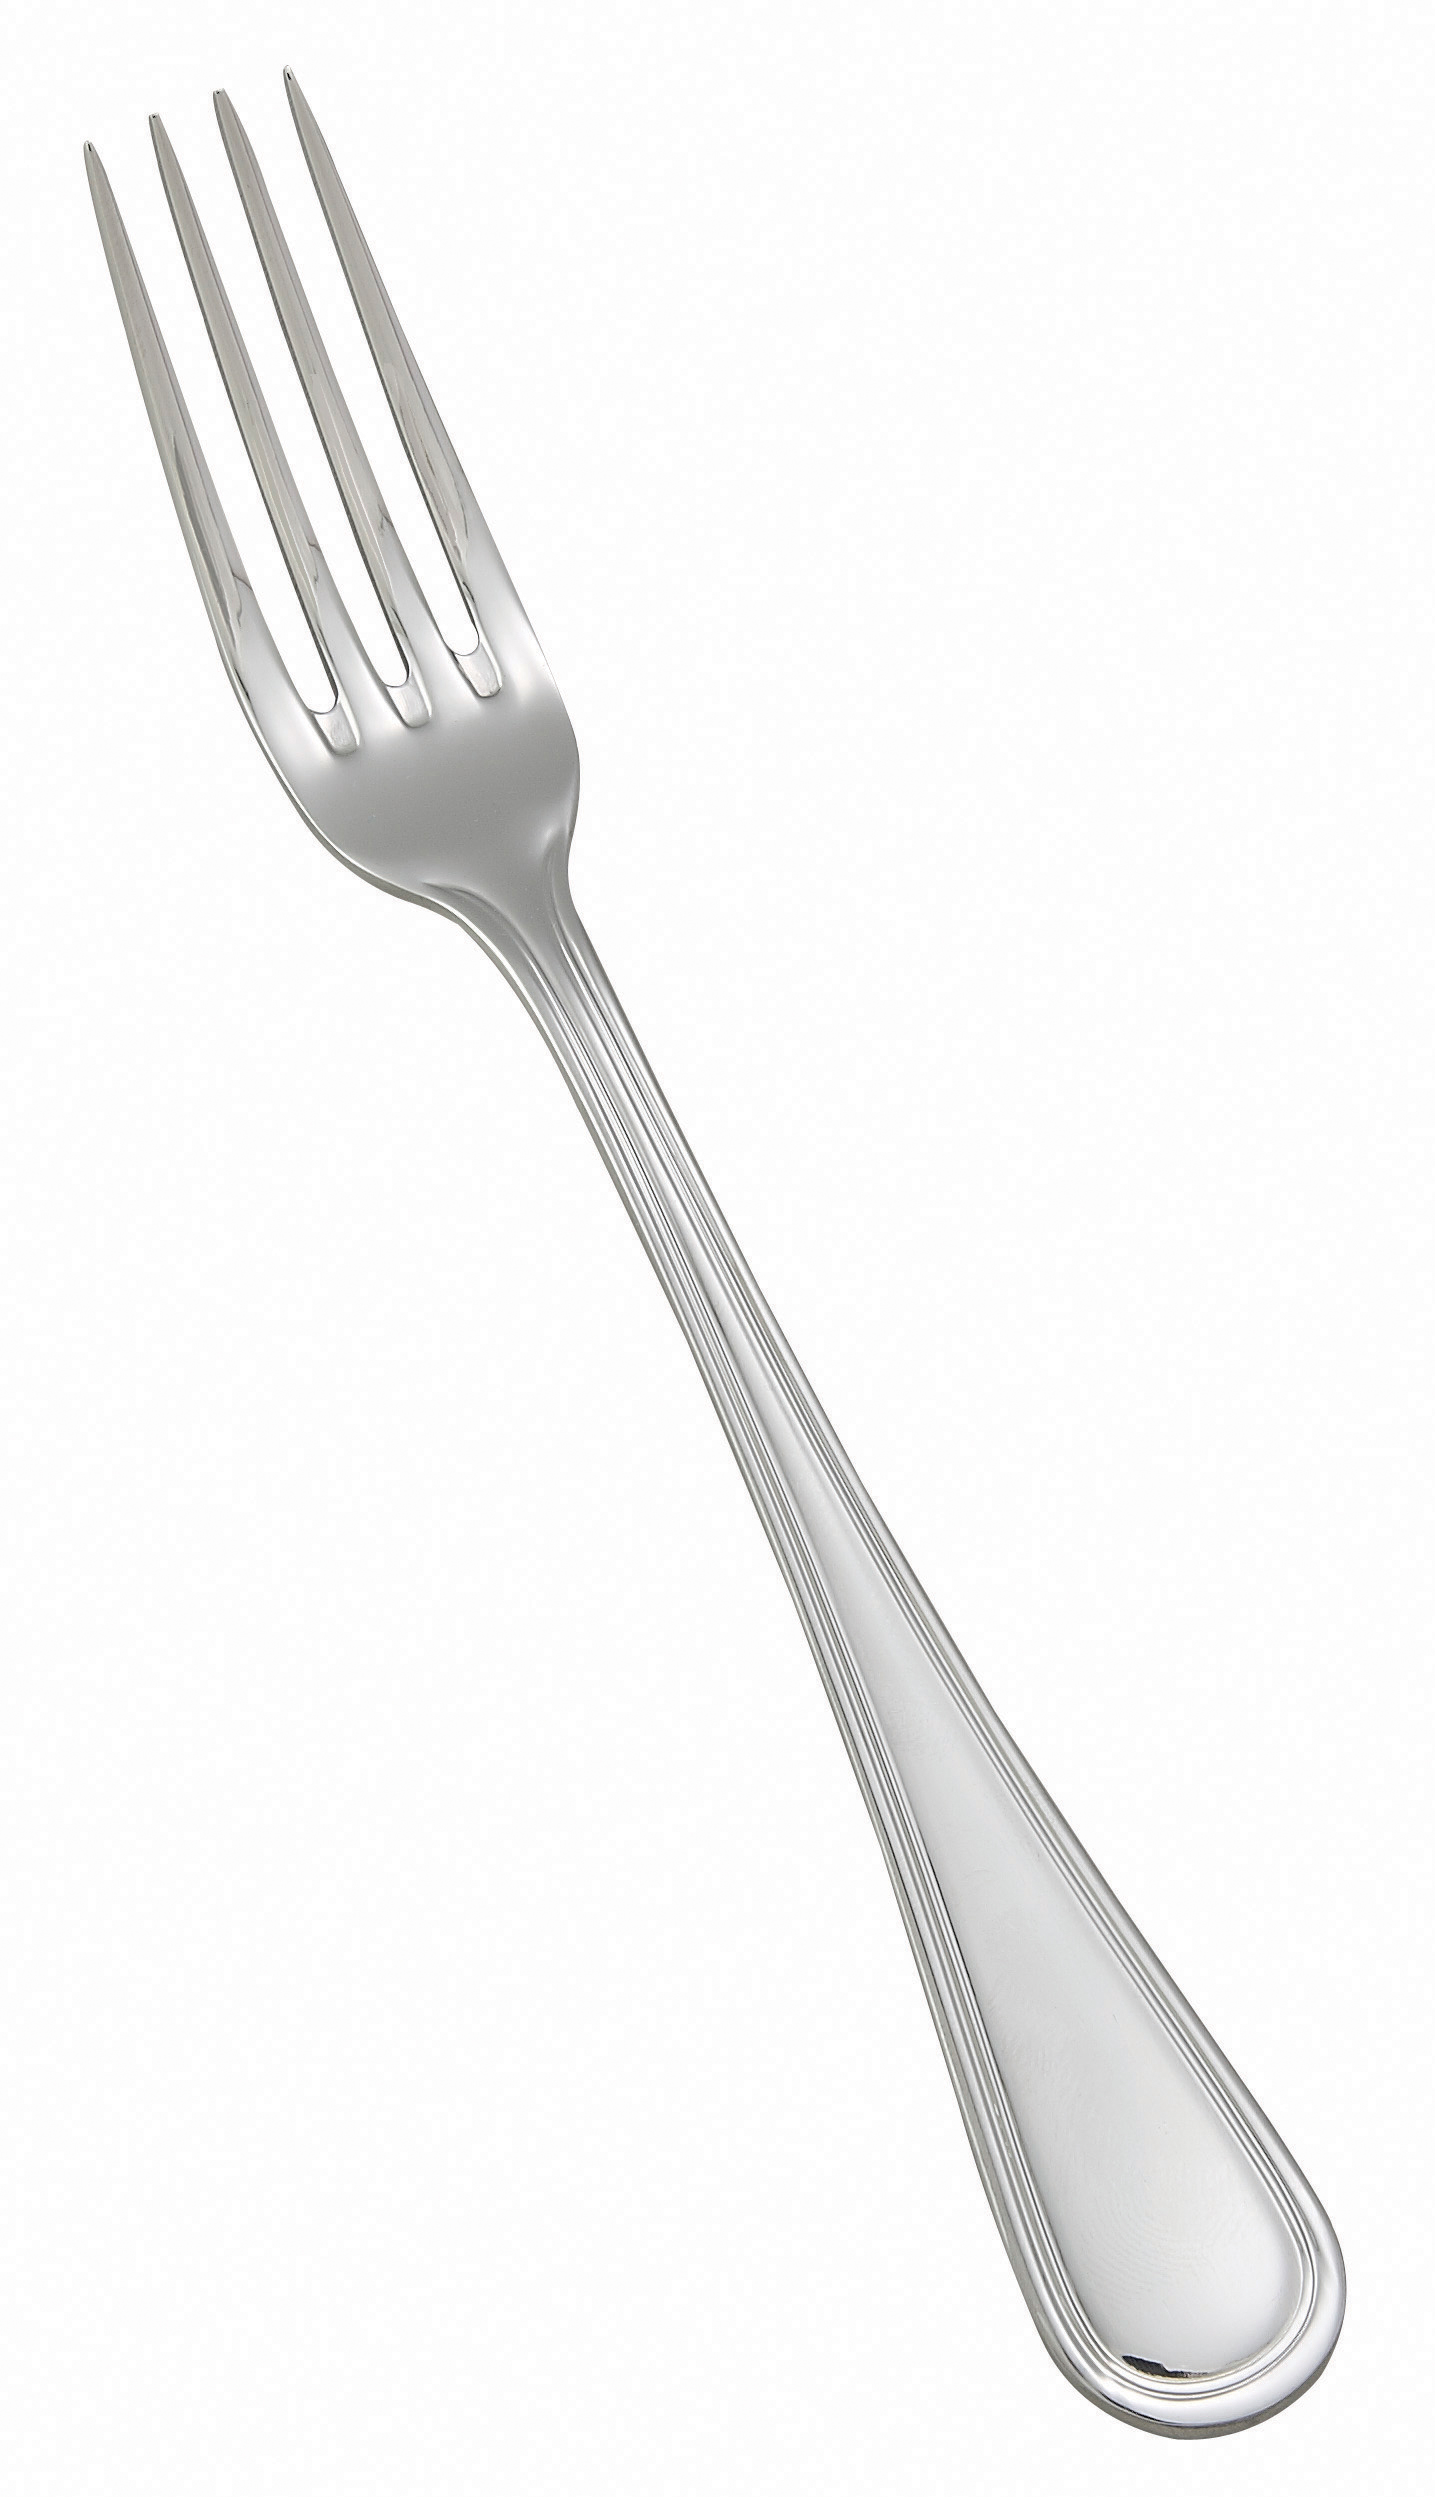 European Table Fork, 18/0 stainless steel, extra heavy,